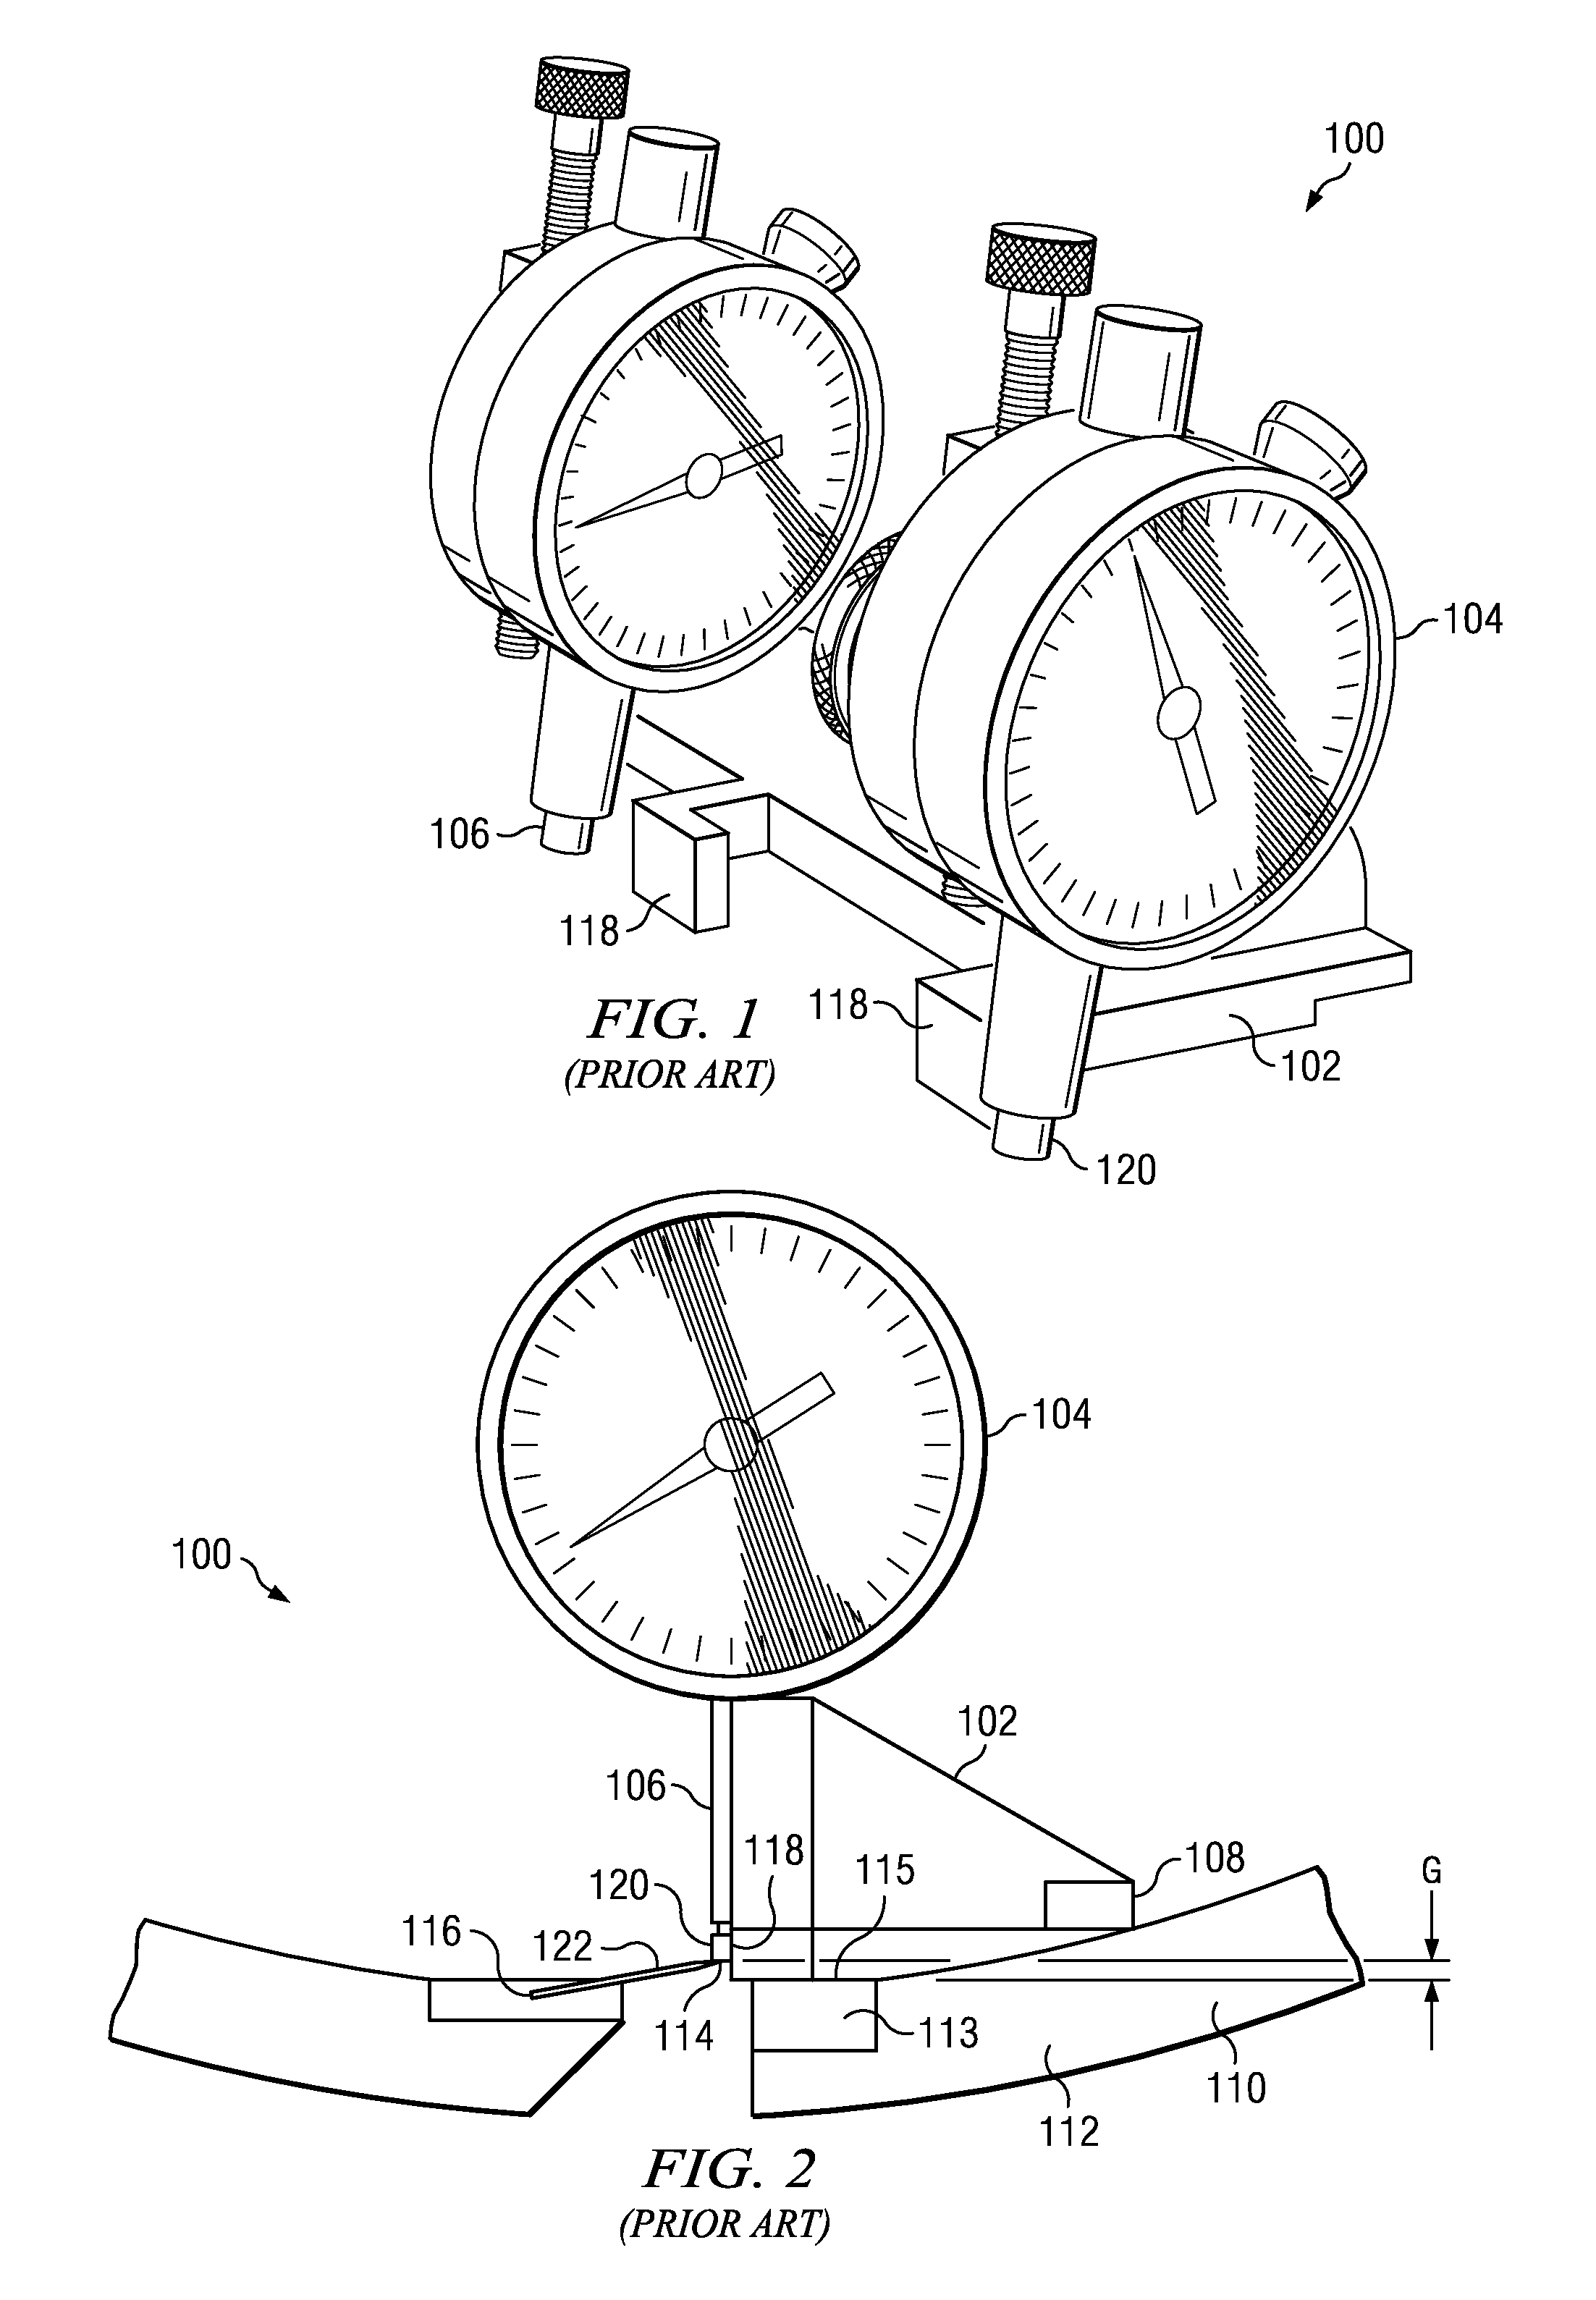 Blade Gap Setting for Blade Cutter Assembly